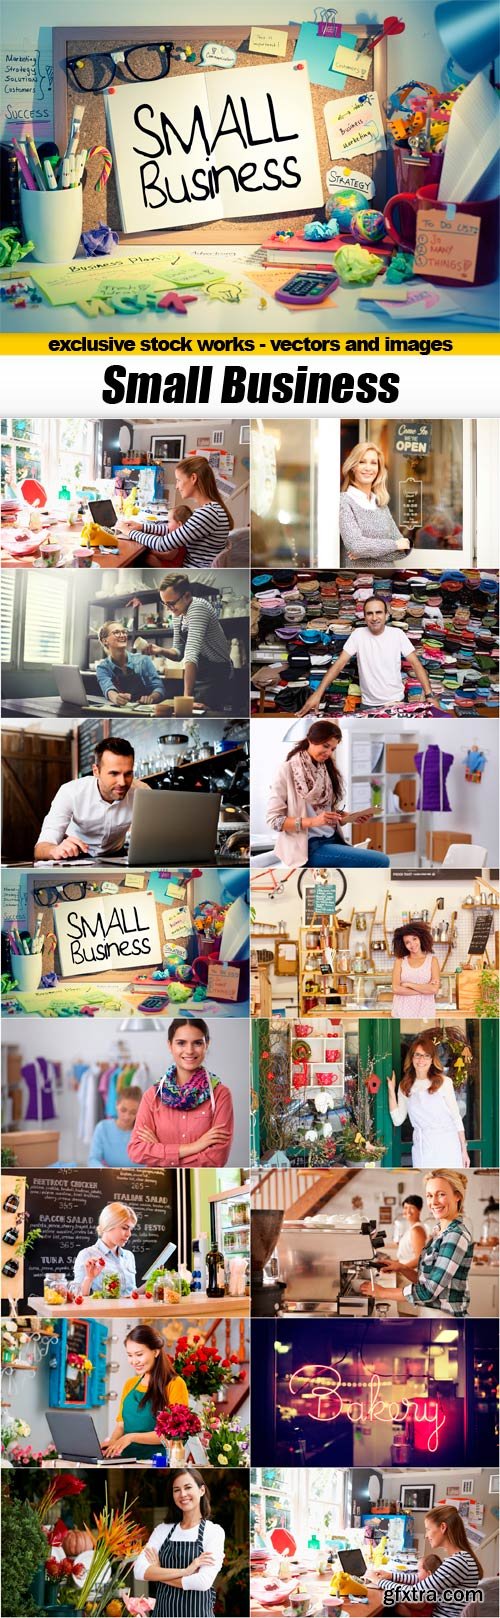 Small Business - 15x JPEGs